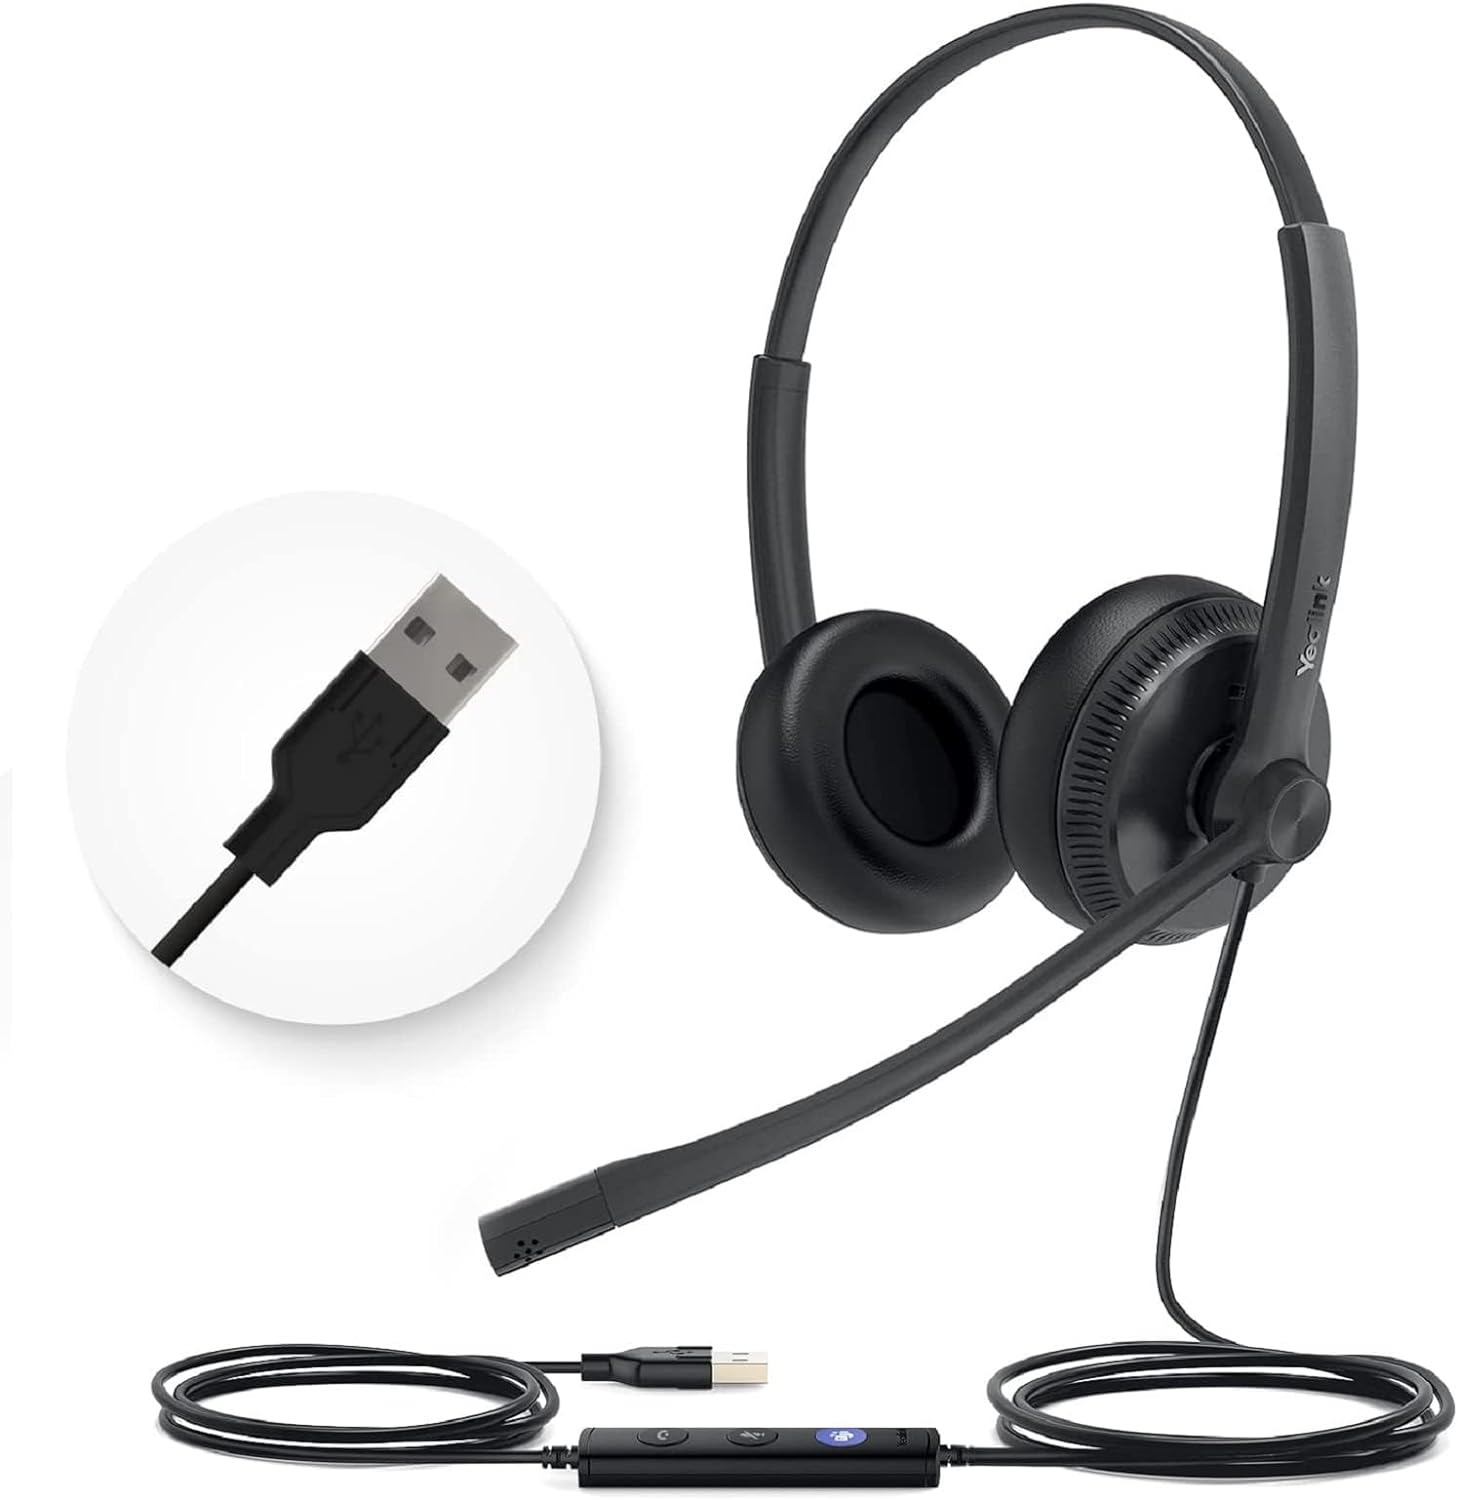 UH34 USB Wired Headset with Microphone - Stereo Headphones with Noise Cancelling